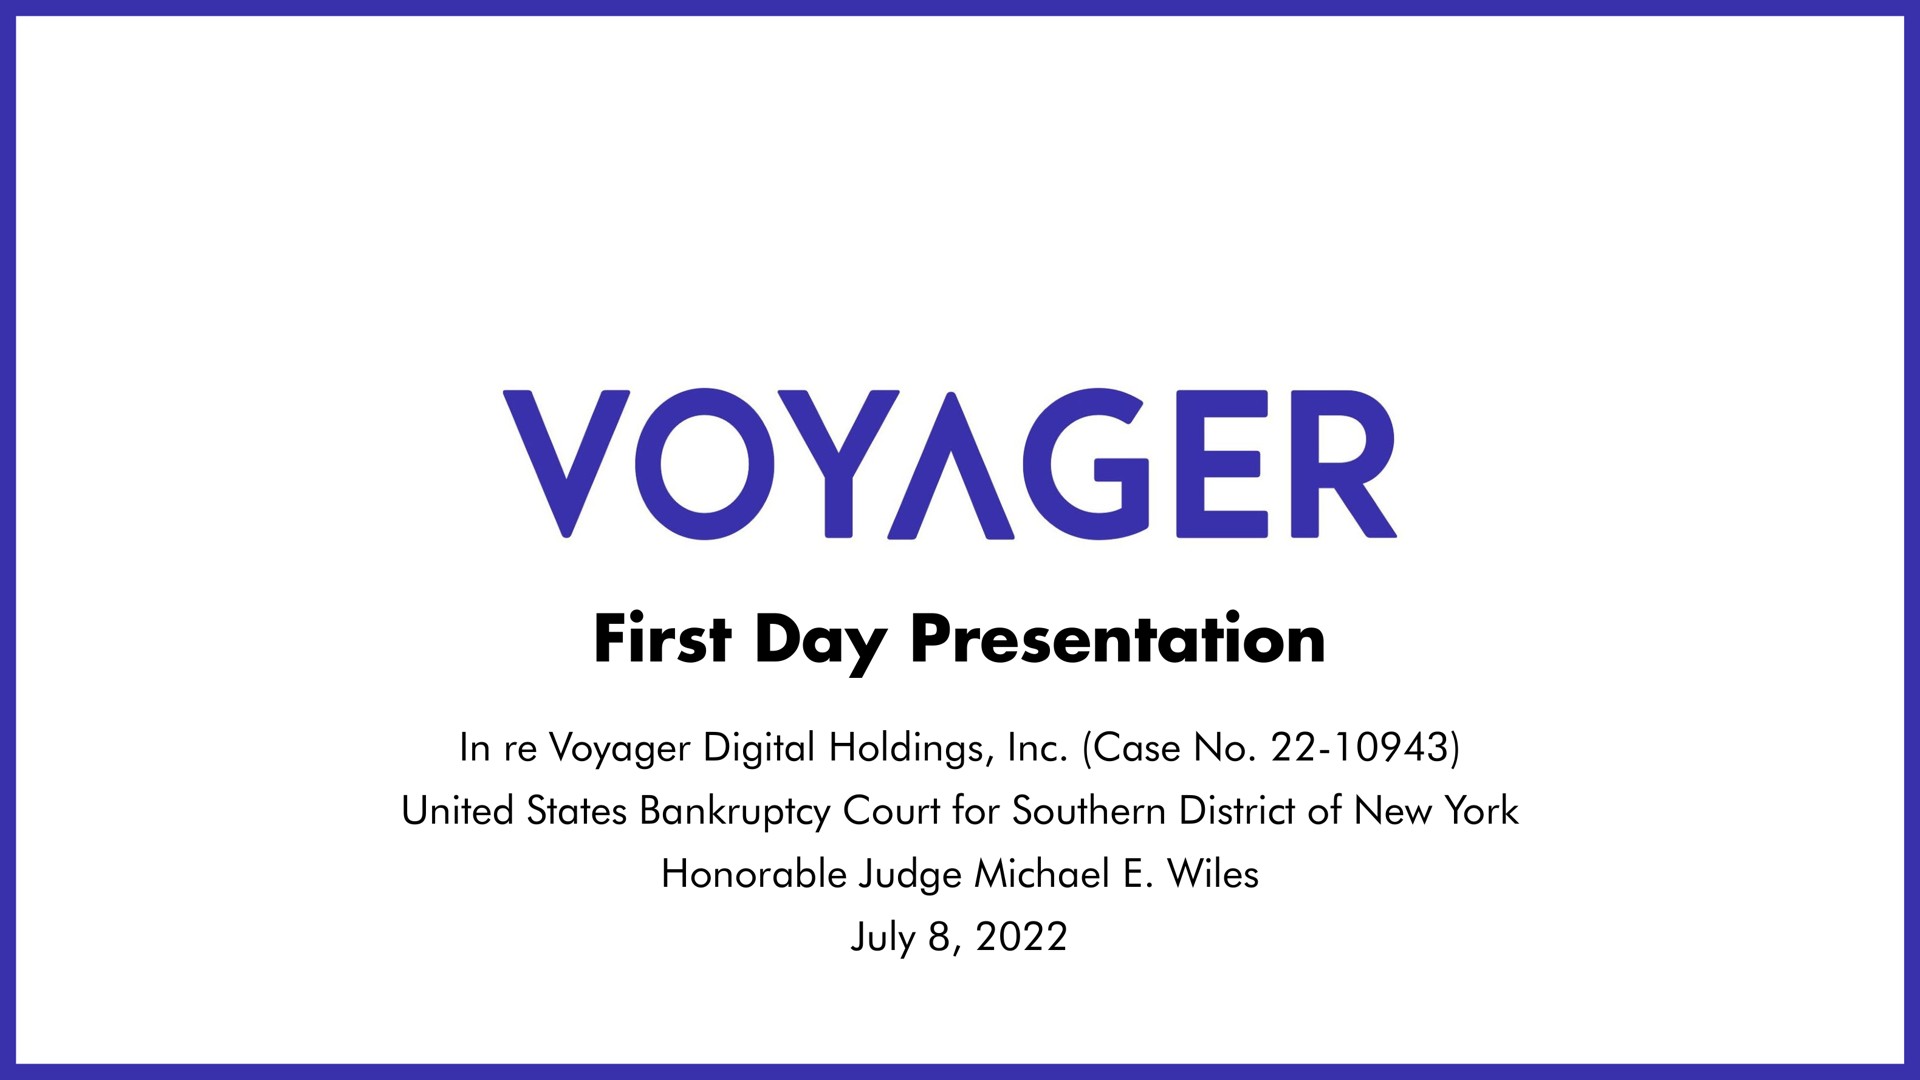 first day presentation voyager united states bankruptcy court for southern district of new york in voyager digital holdings case no honorable judge wiles | Voyager Digital